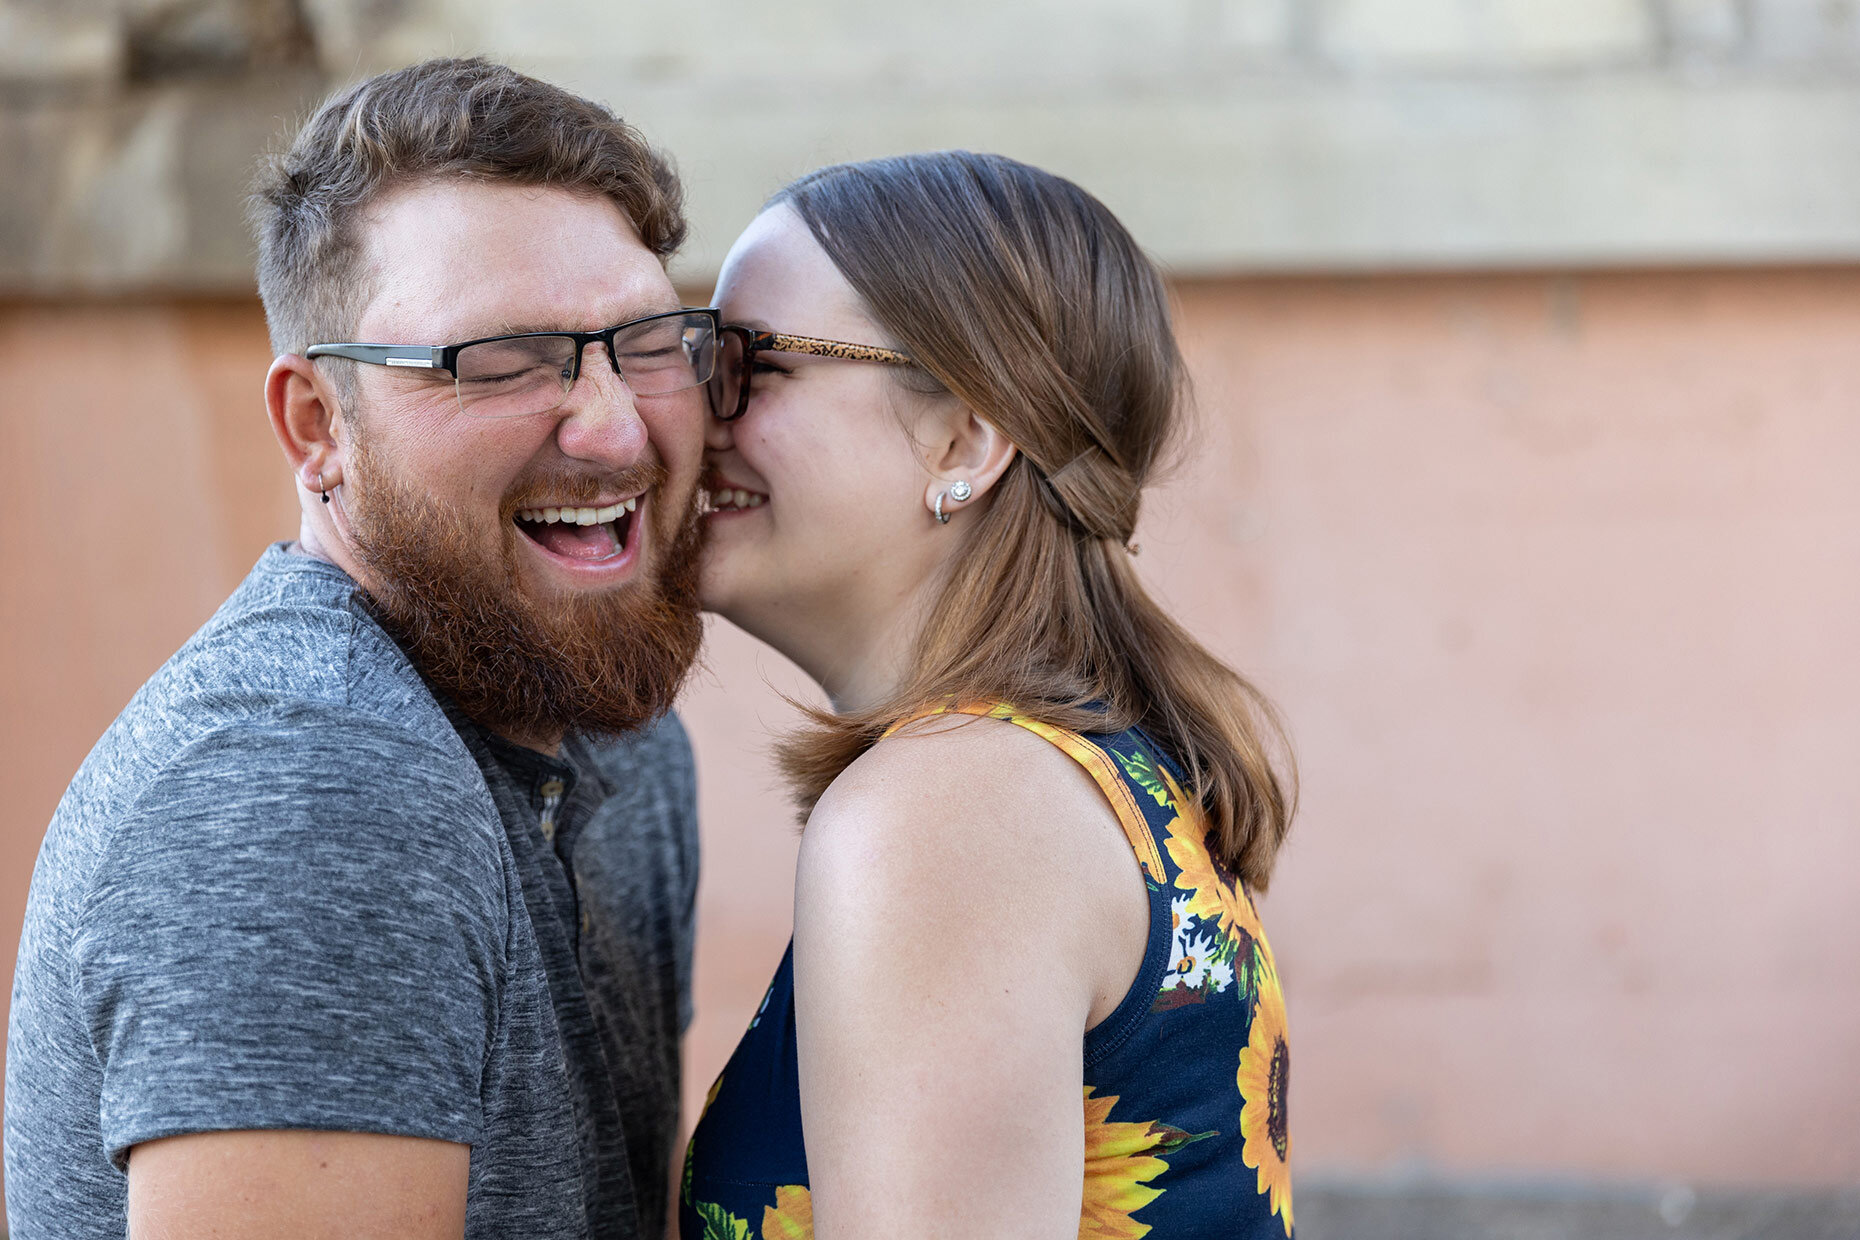 Laughing in Engagement Photos